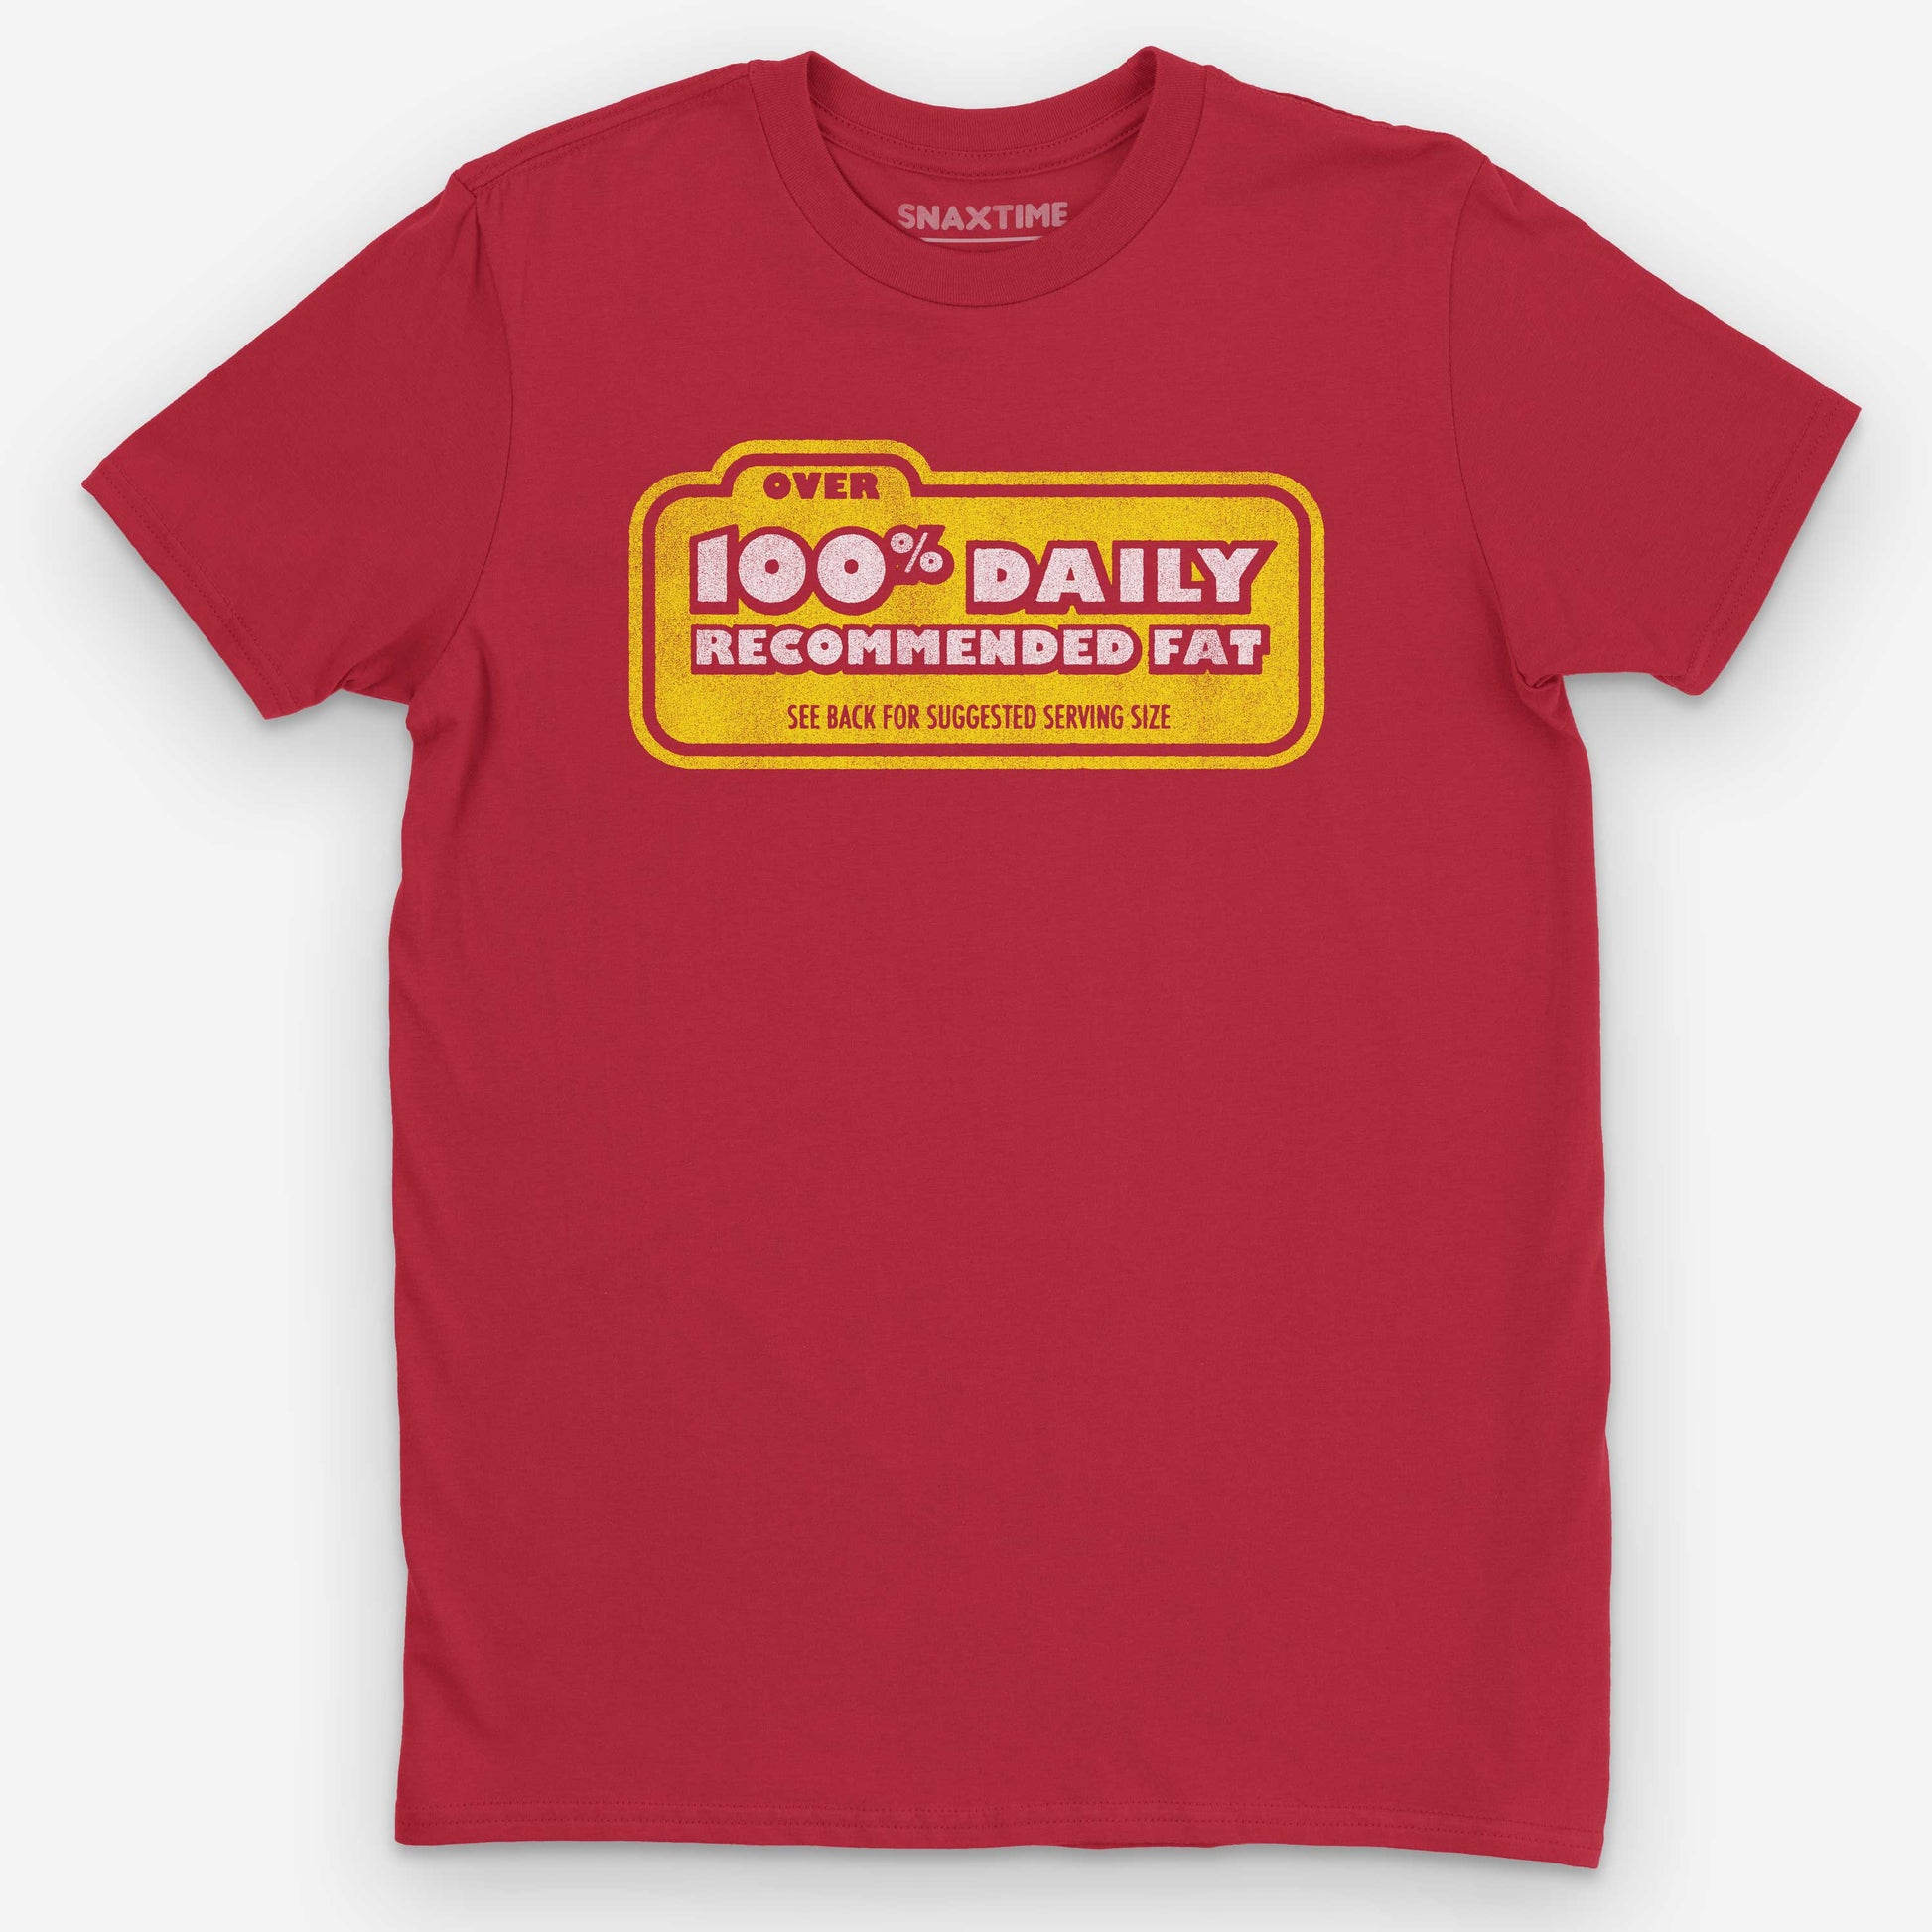 Red 100% Recommended Fat Label Graphic T-Shirt by Snaxtime